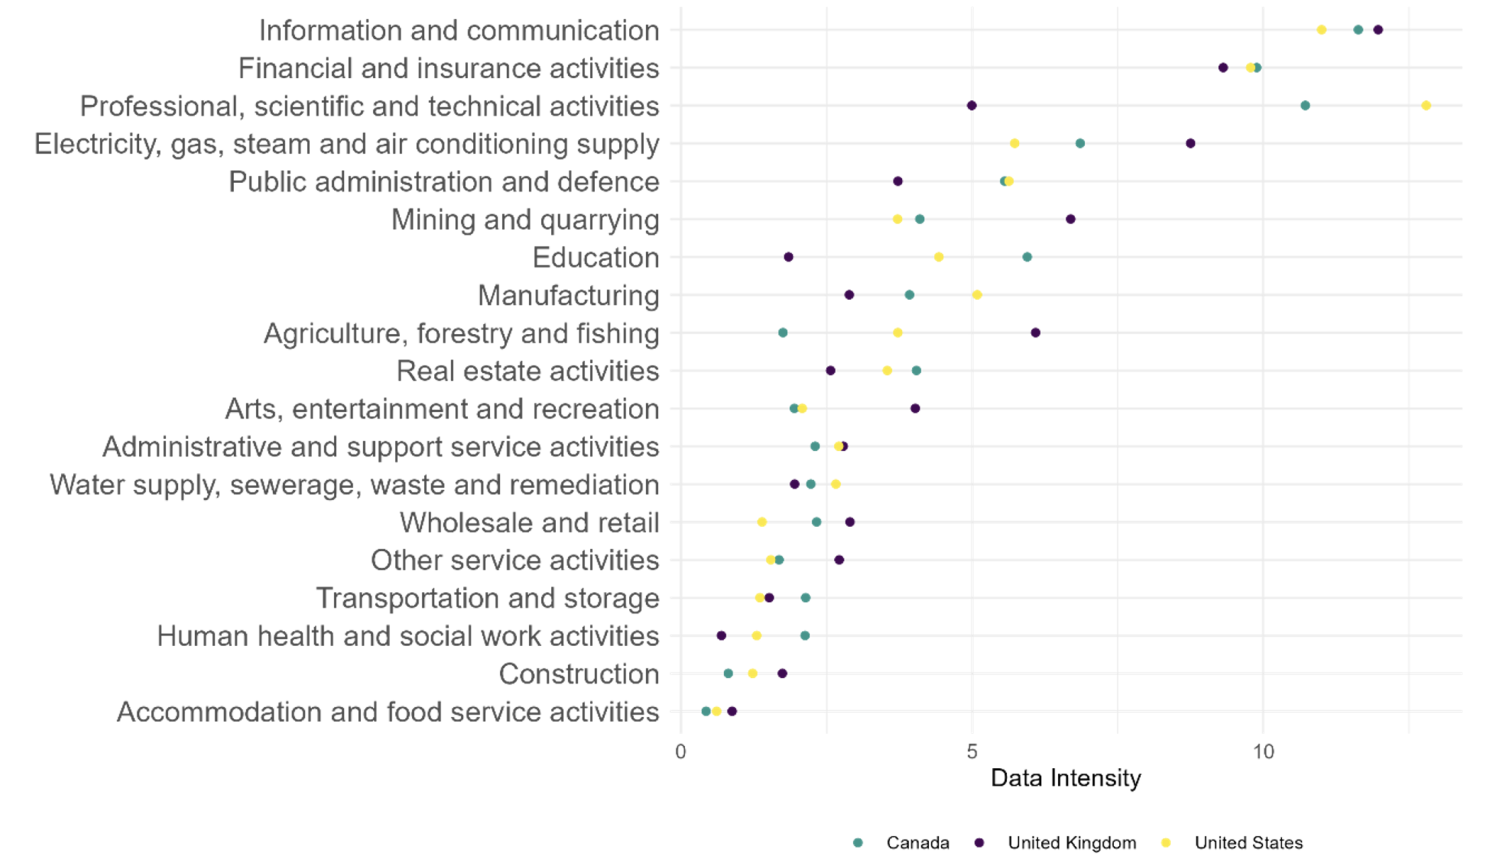 Figure 2 Data intensity in the US, Canada, and the US by industry